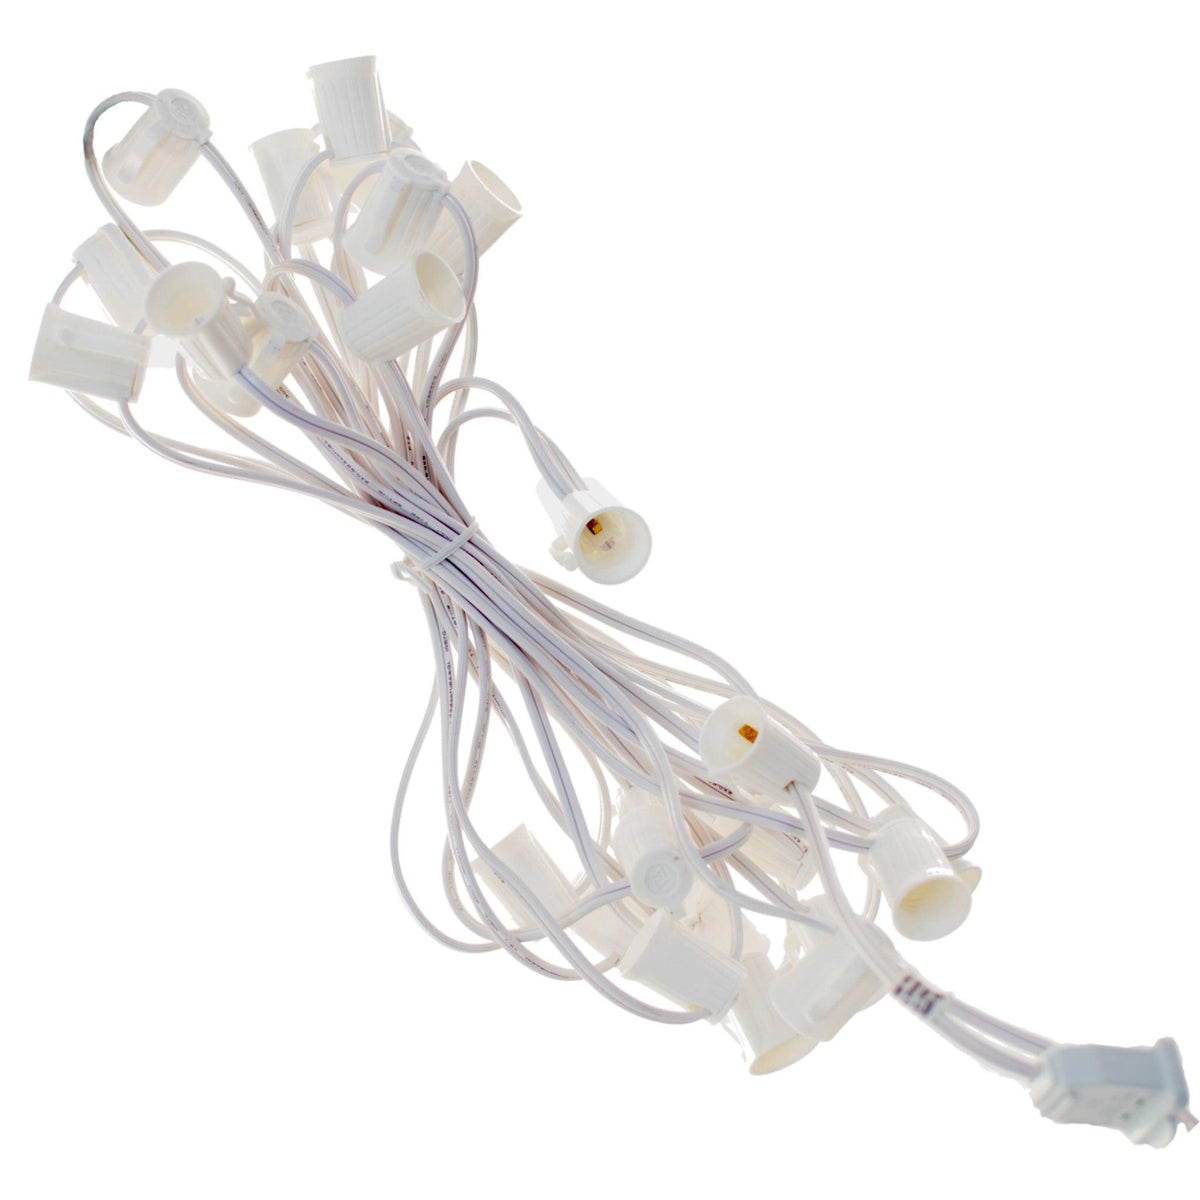 25FT Clear Magnetic Outdoor String Lighting Set!    Choose between Twinkling Bulbs and Steady Burning Bulbs, White Wire or Green Wire Cords, C7 & C9 Size available.  Shop now at leedisplay.com